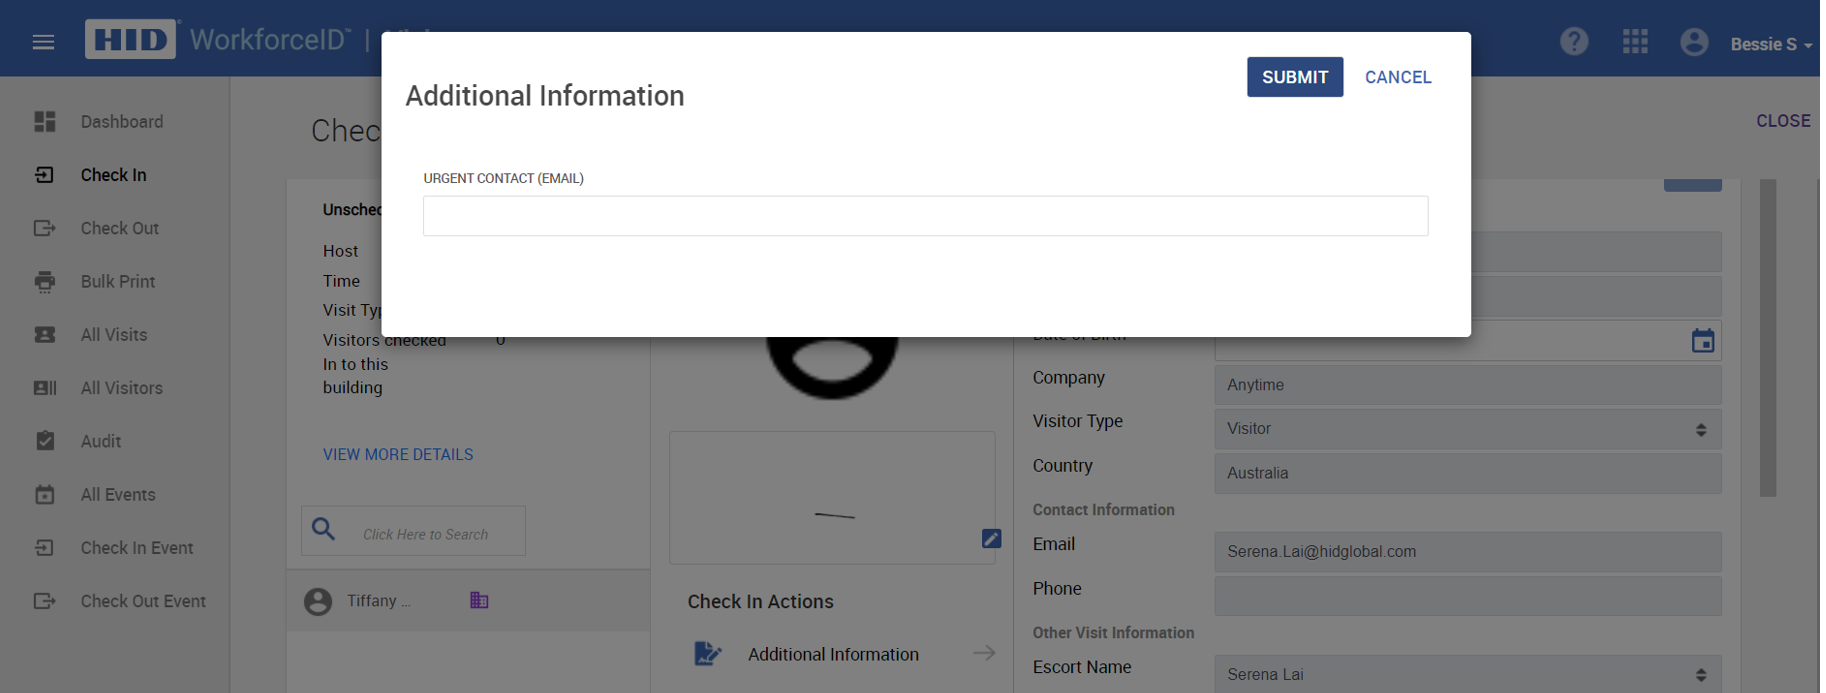 Collect additional information during Visitor Check-In via Custom Fields